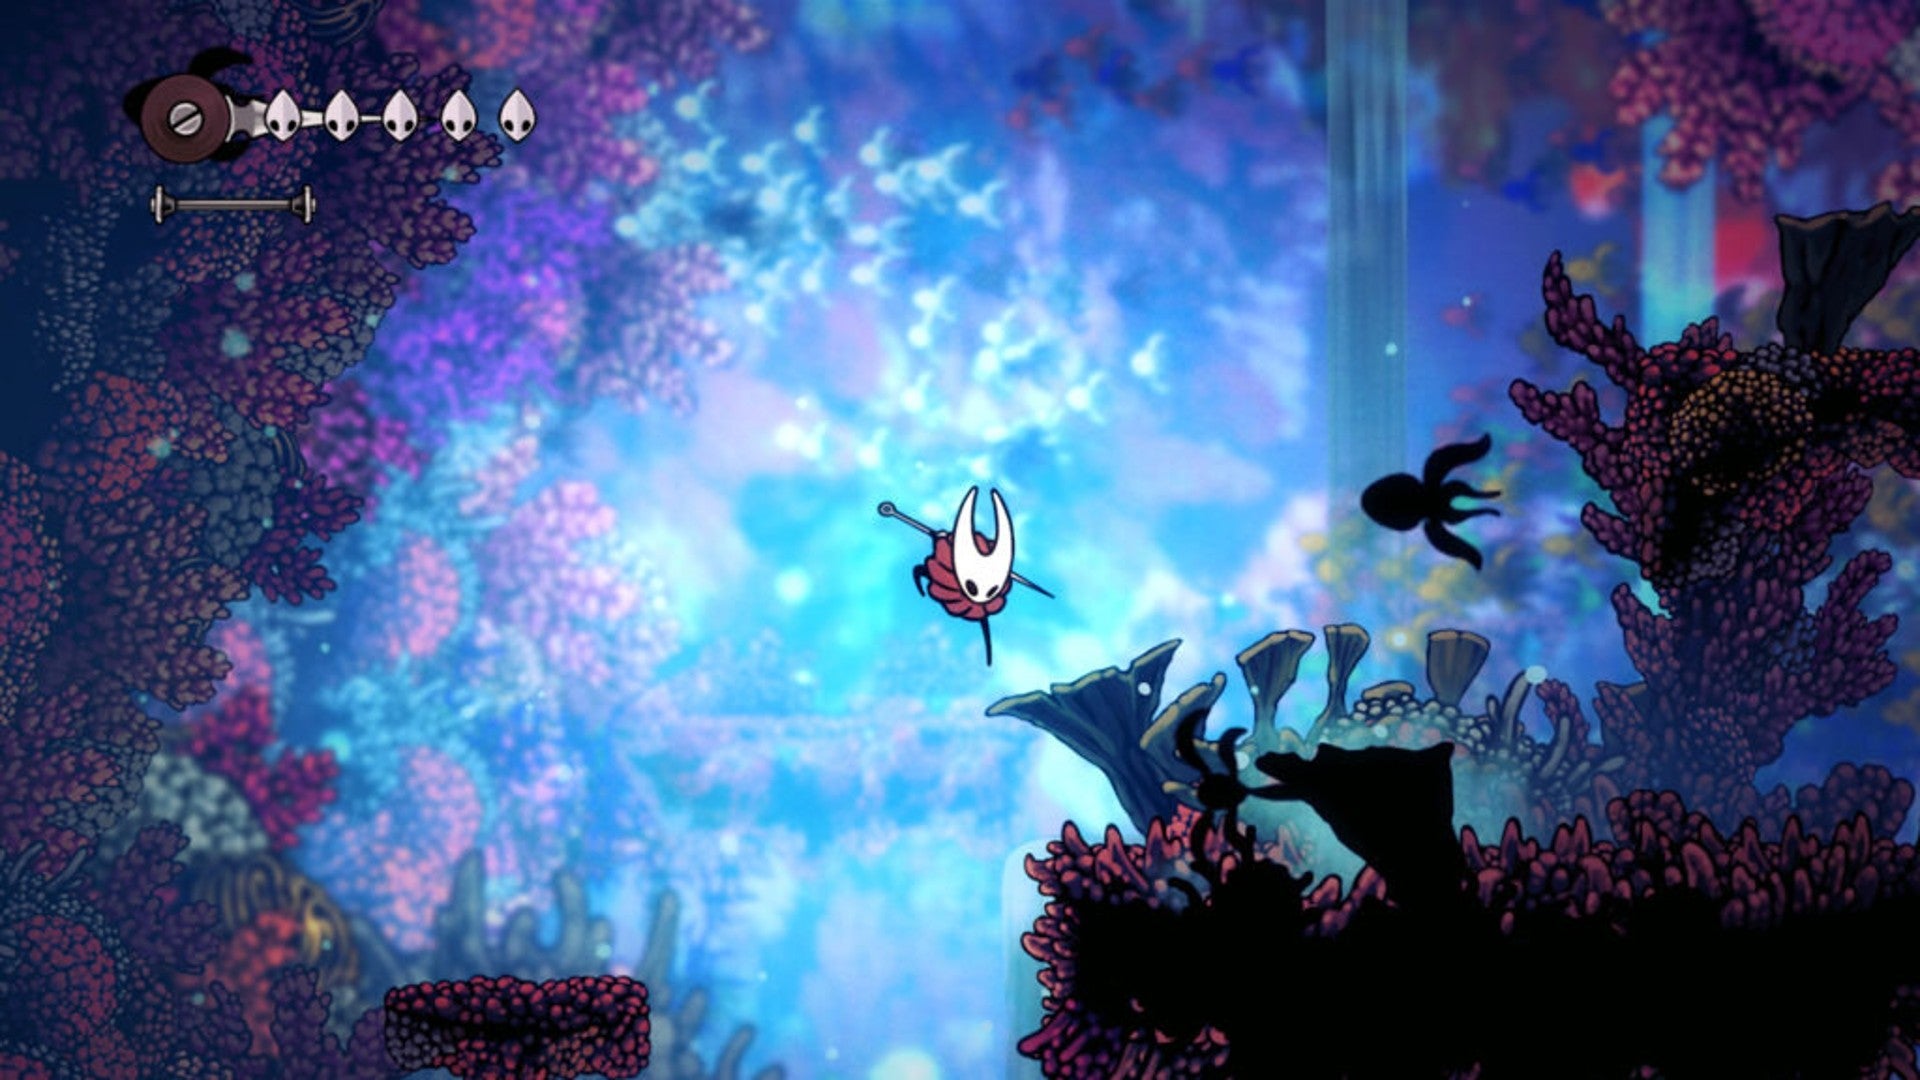 Hollow Knight: Silksong image, showing Hornet leaping down through a vibrant forested area.